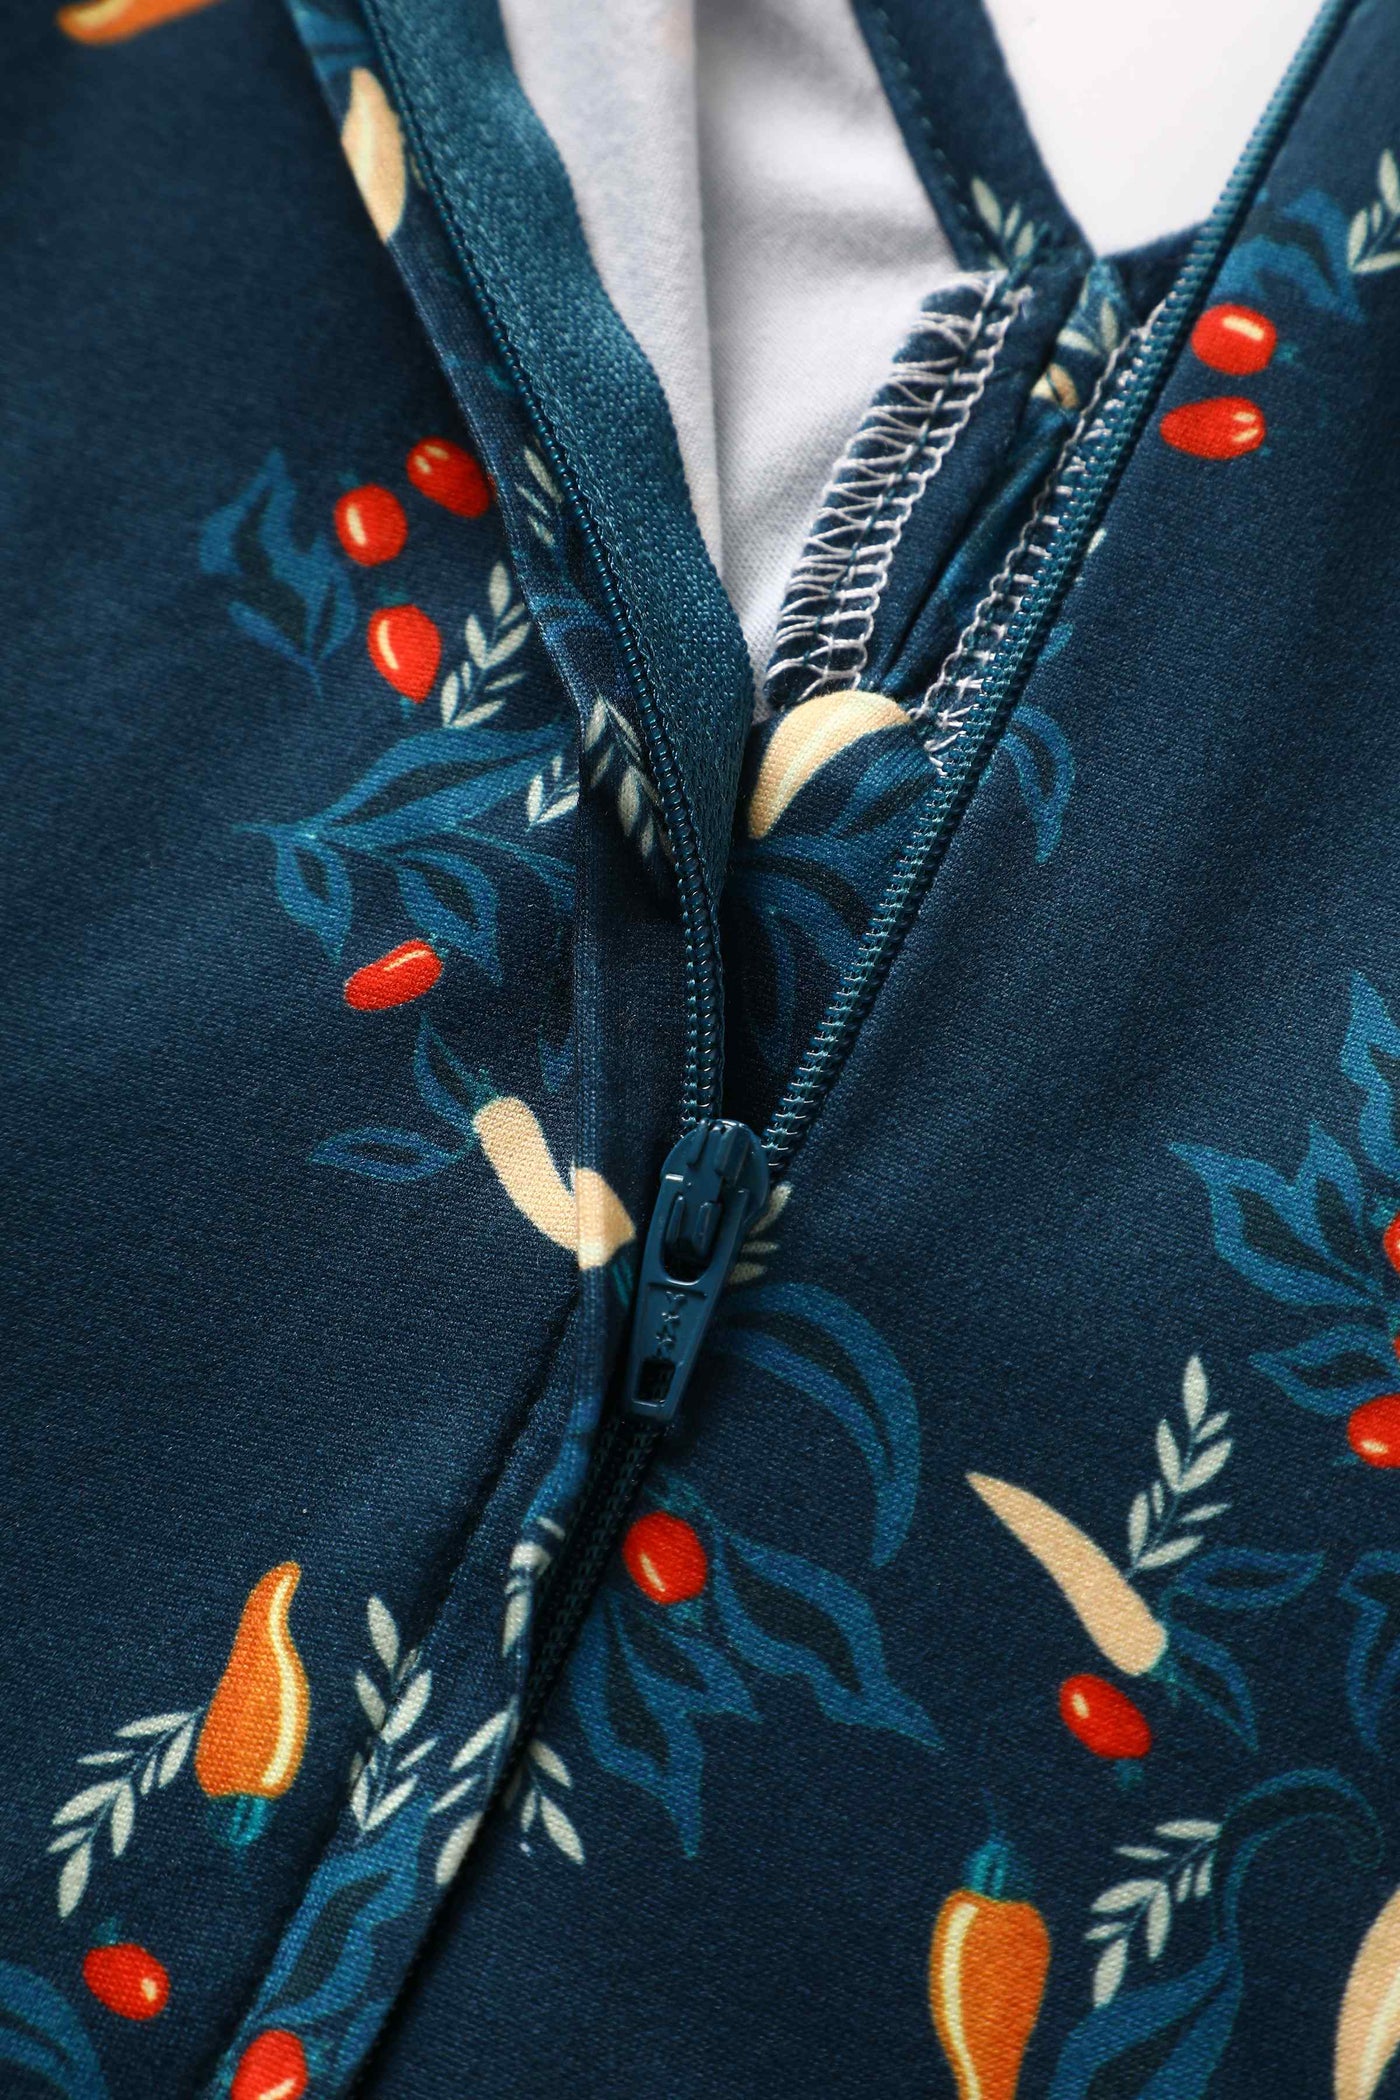 Close up View of 50s style blue chili print vintage swing dress